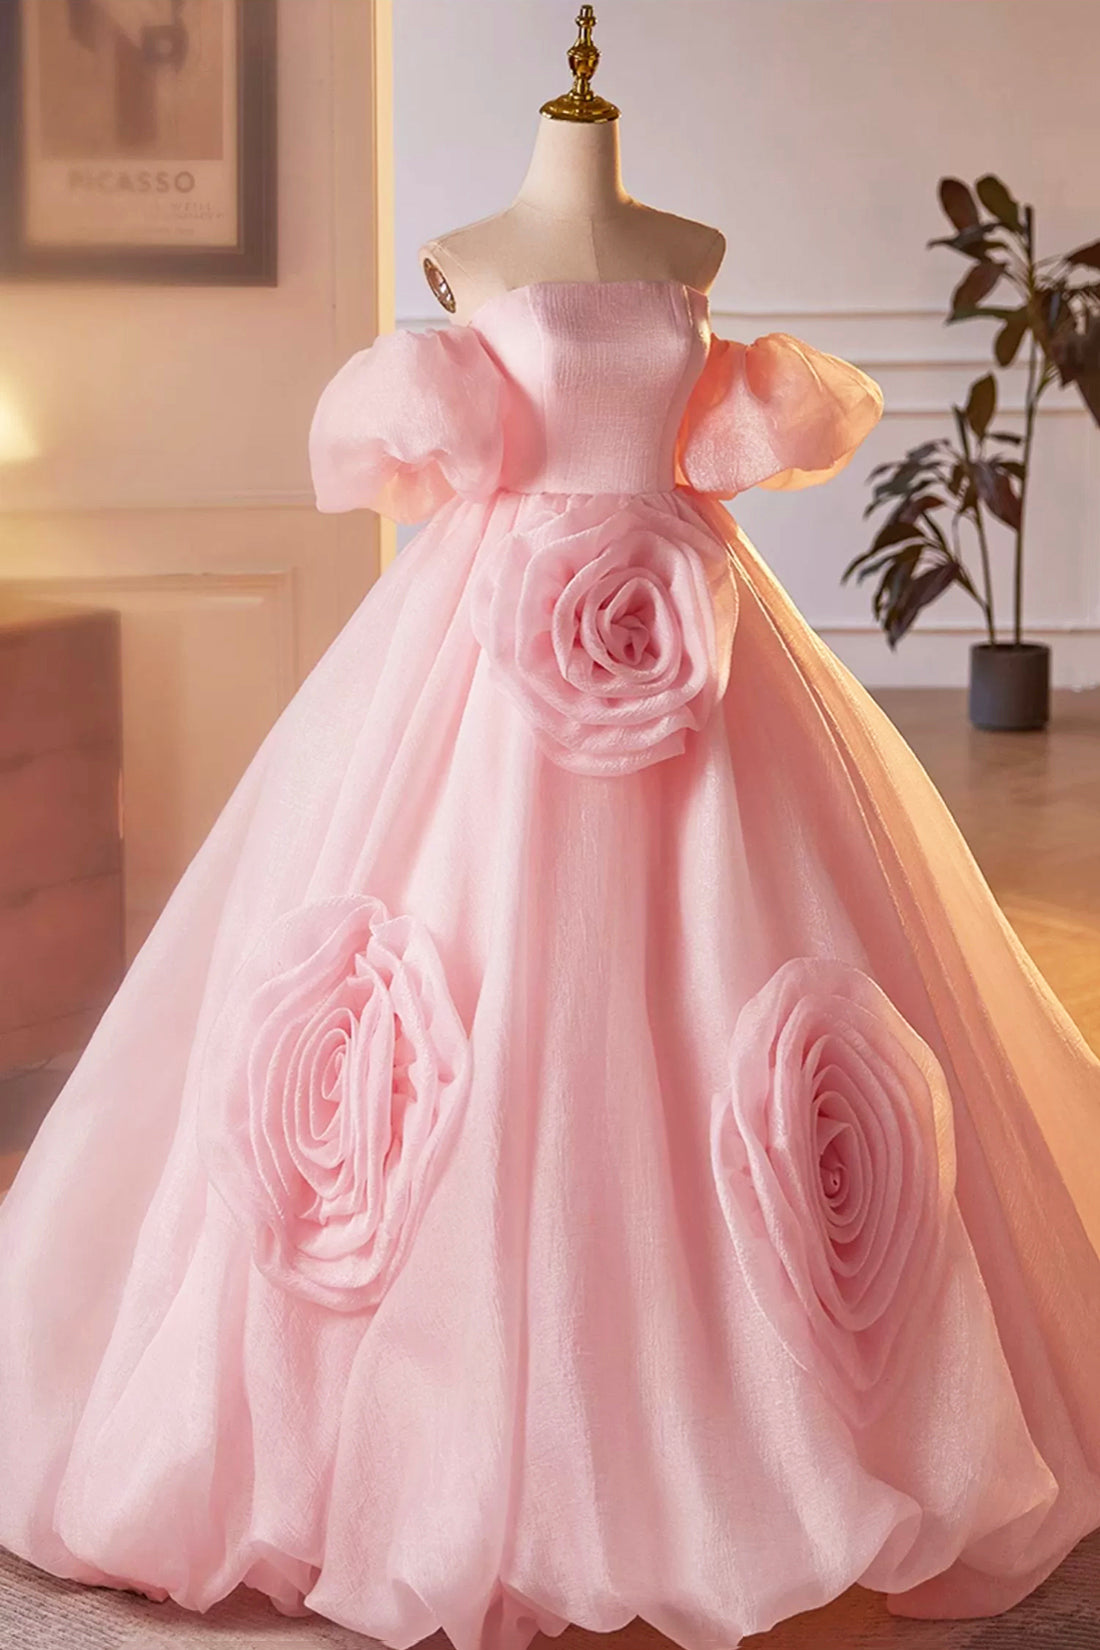 Homecomming Dresses Fitted, Pink A-Line Sweetheart Ball Gown Formal Dress with Flowers, Off the Shoulder Evening Party Dress